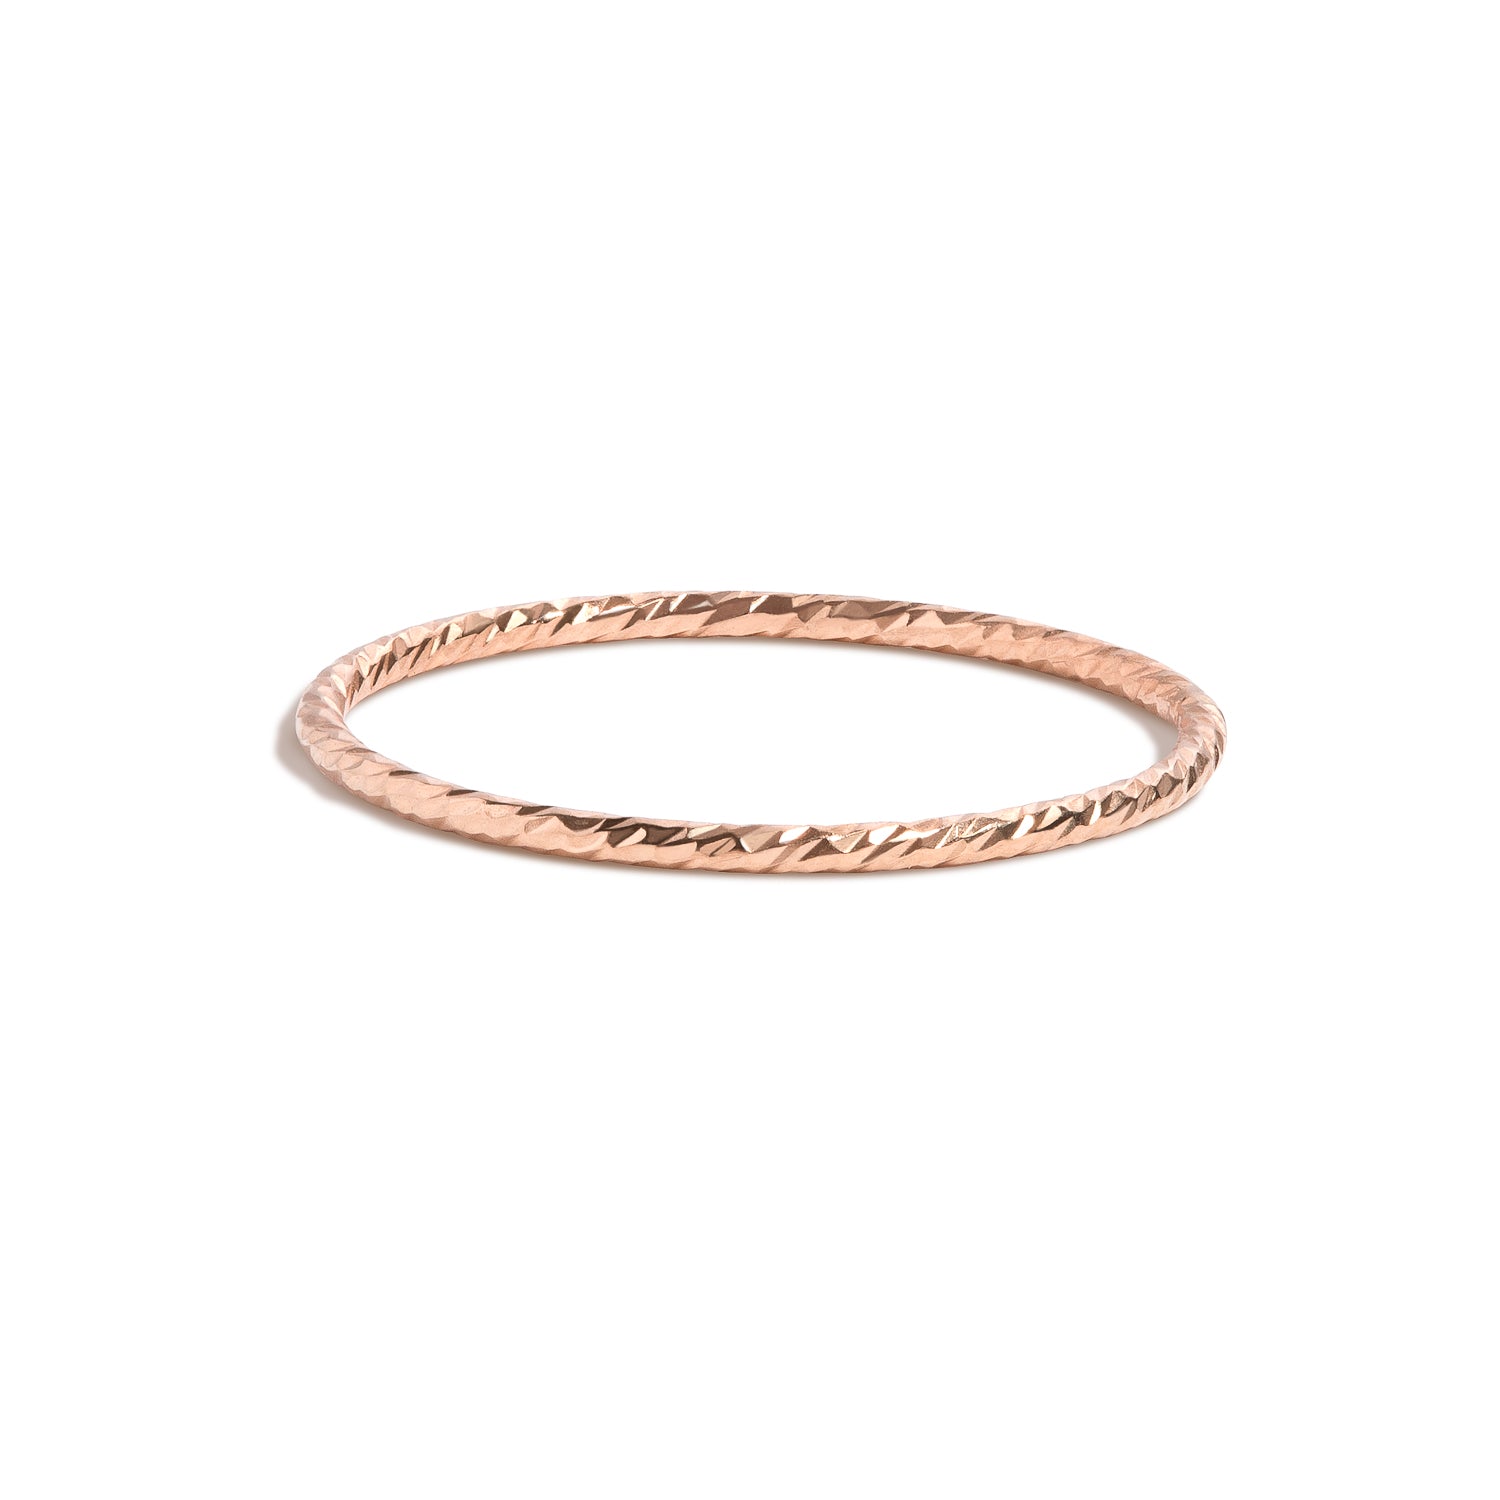 Shahla Karimi Jewelry Barely There Twisted Rope Band 14K Rose Gold